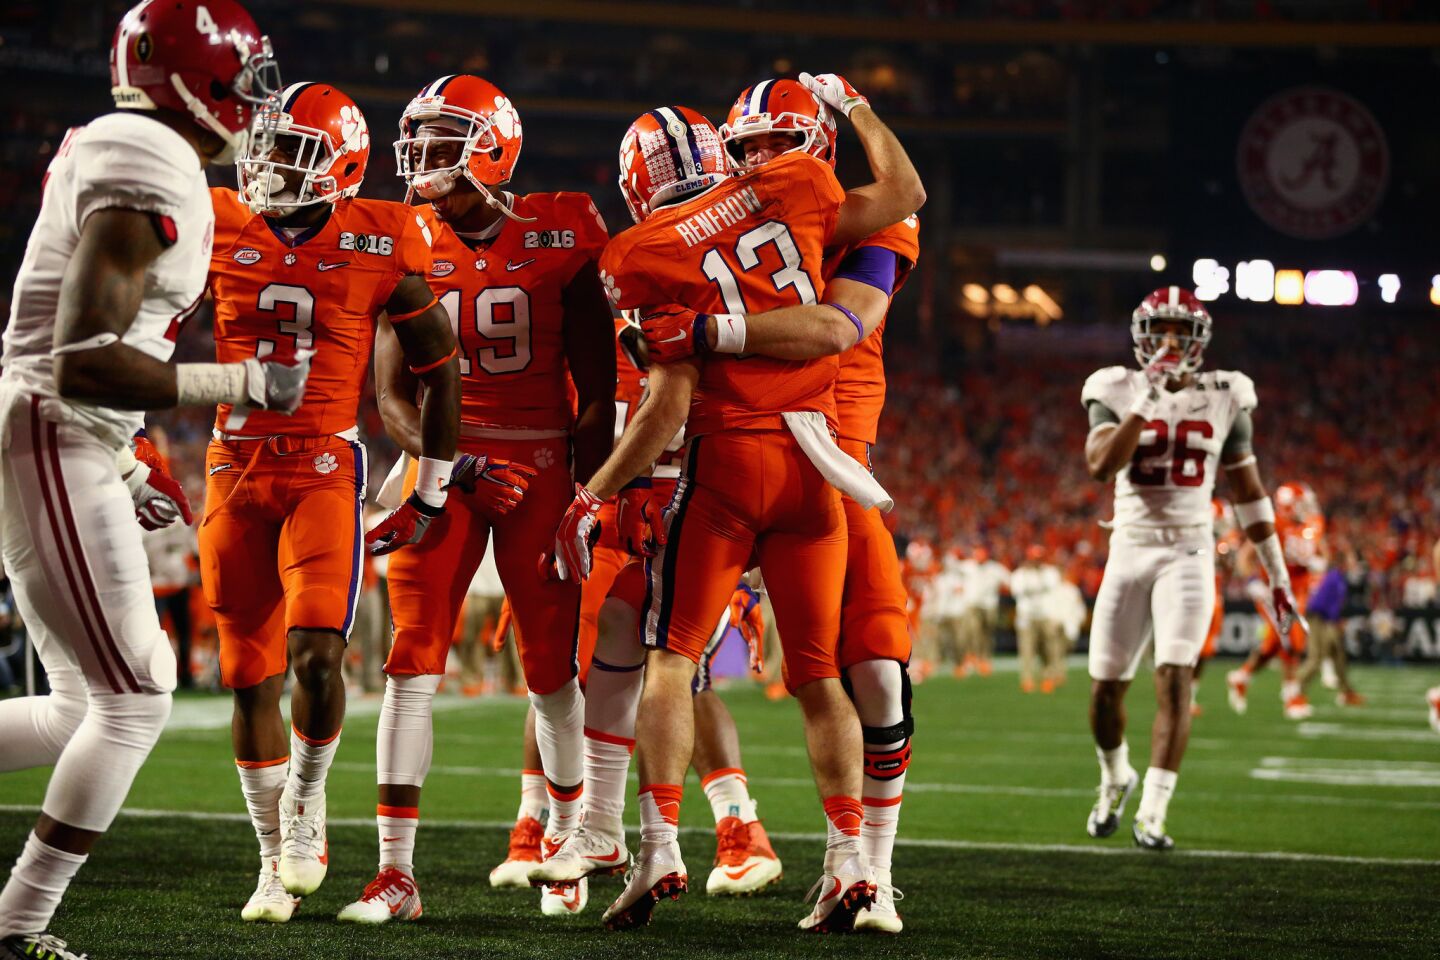 Clemson receiver Hunter Renfrow celebrates with his teammates after scoring a 31-yard touchdown from Deshaun Watson in the first quarter.